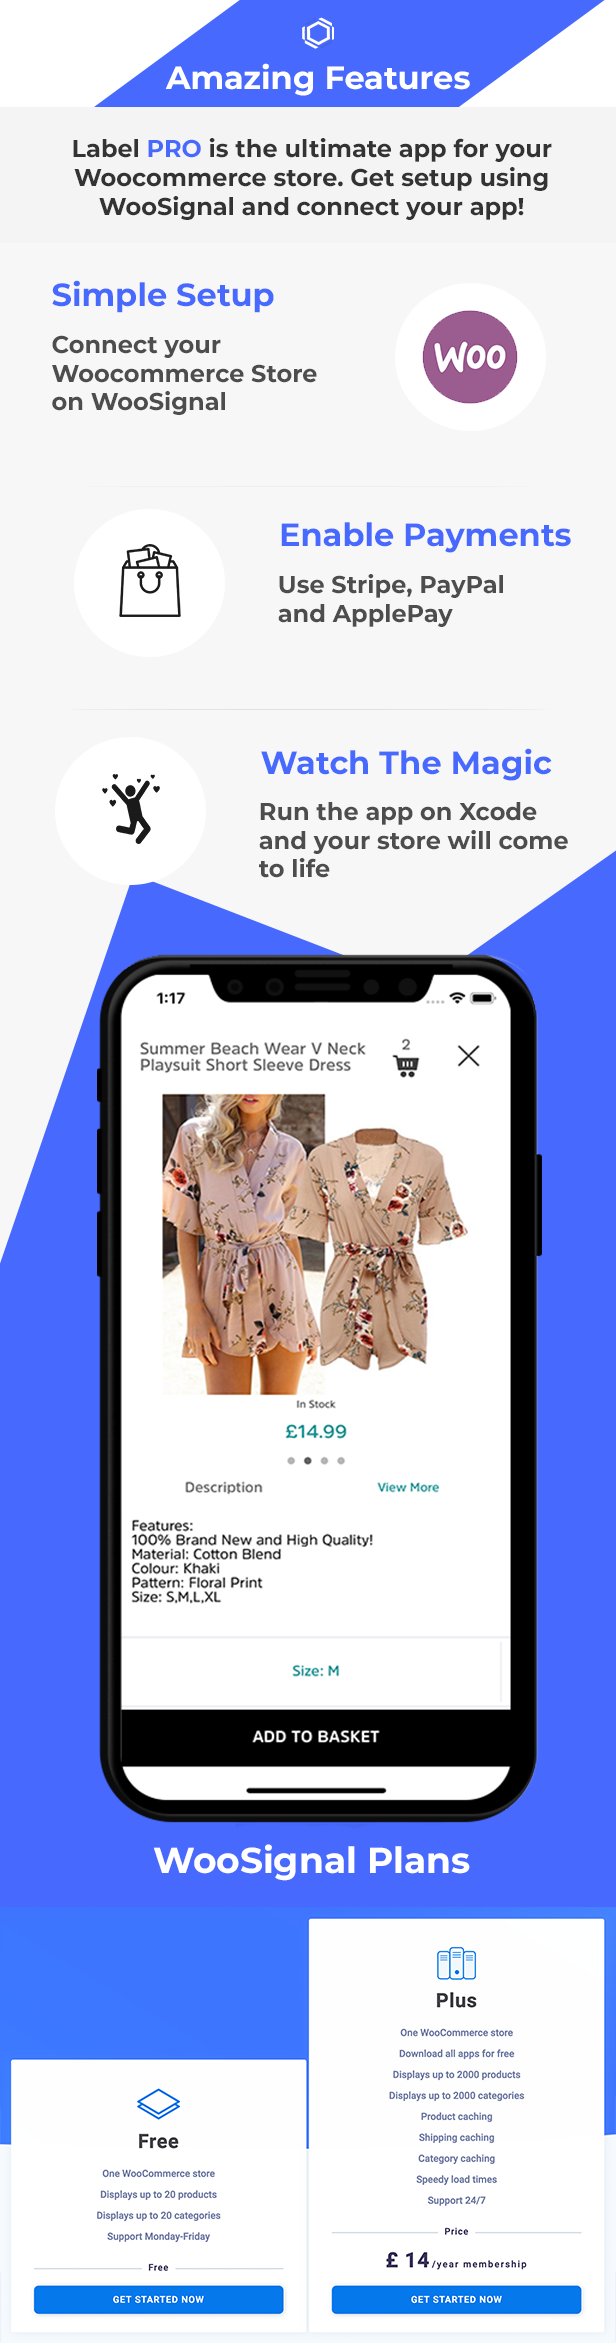 Woocommerce App LabelPRO For Ecommerce Stores Written in Swift 4 Xcode IOS - 5